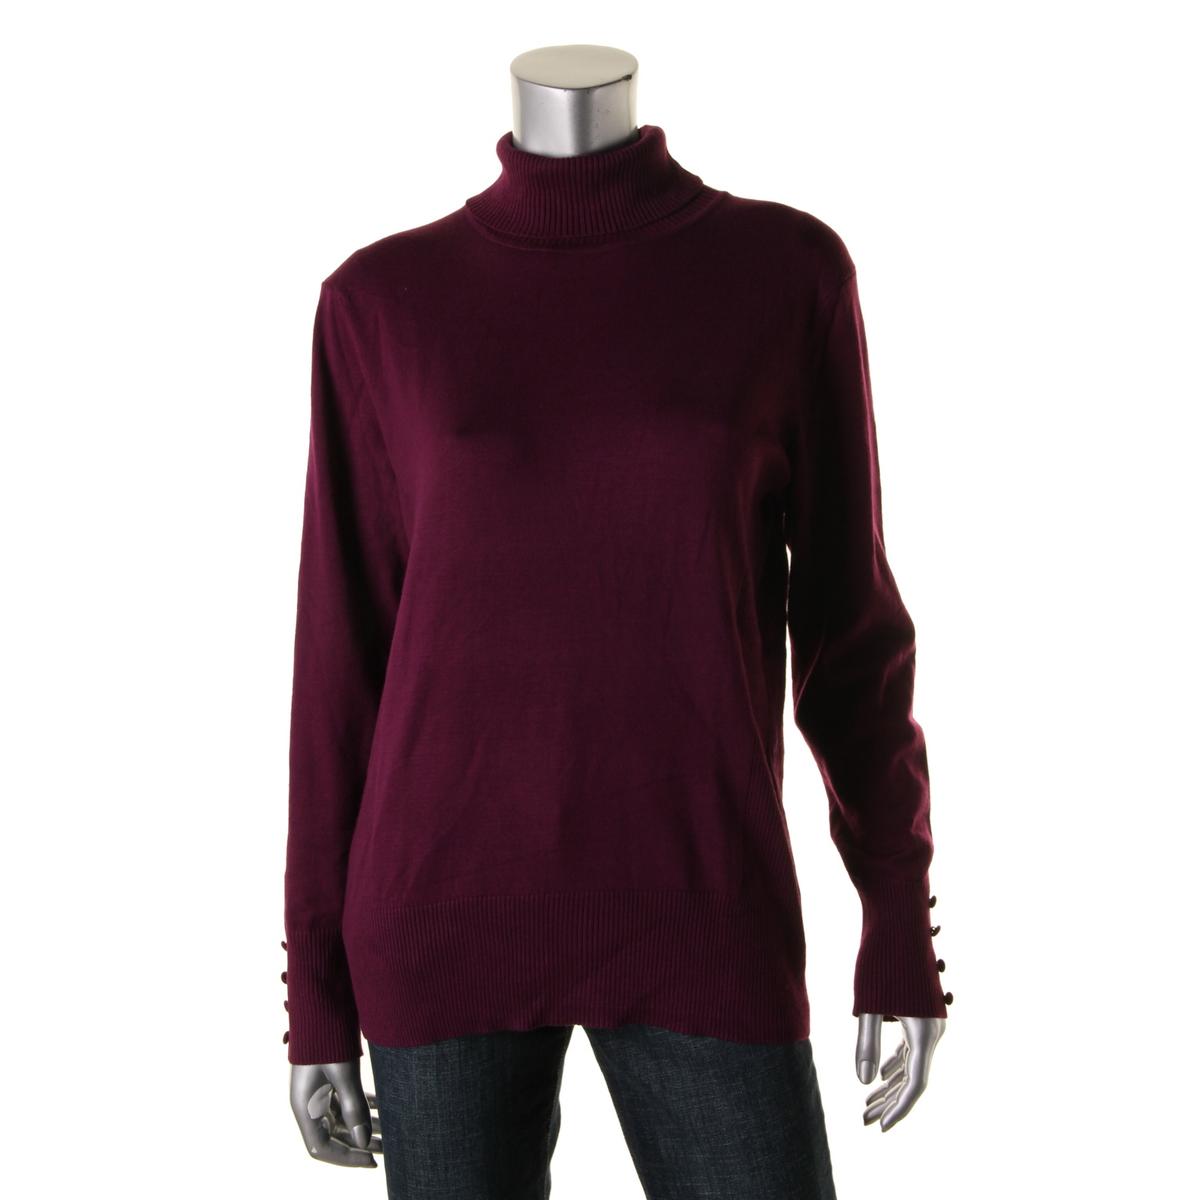 Cable & Gauge 7832 Womens Knit Ribbed Trim Turtleneck Sweater Top BHFO